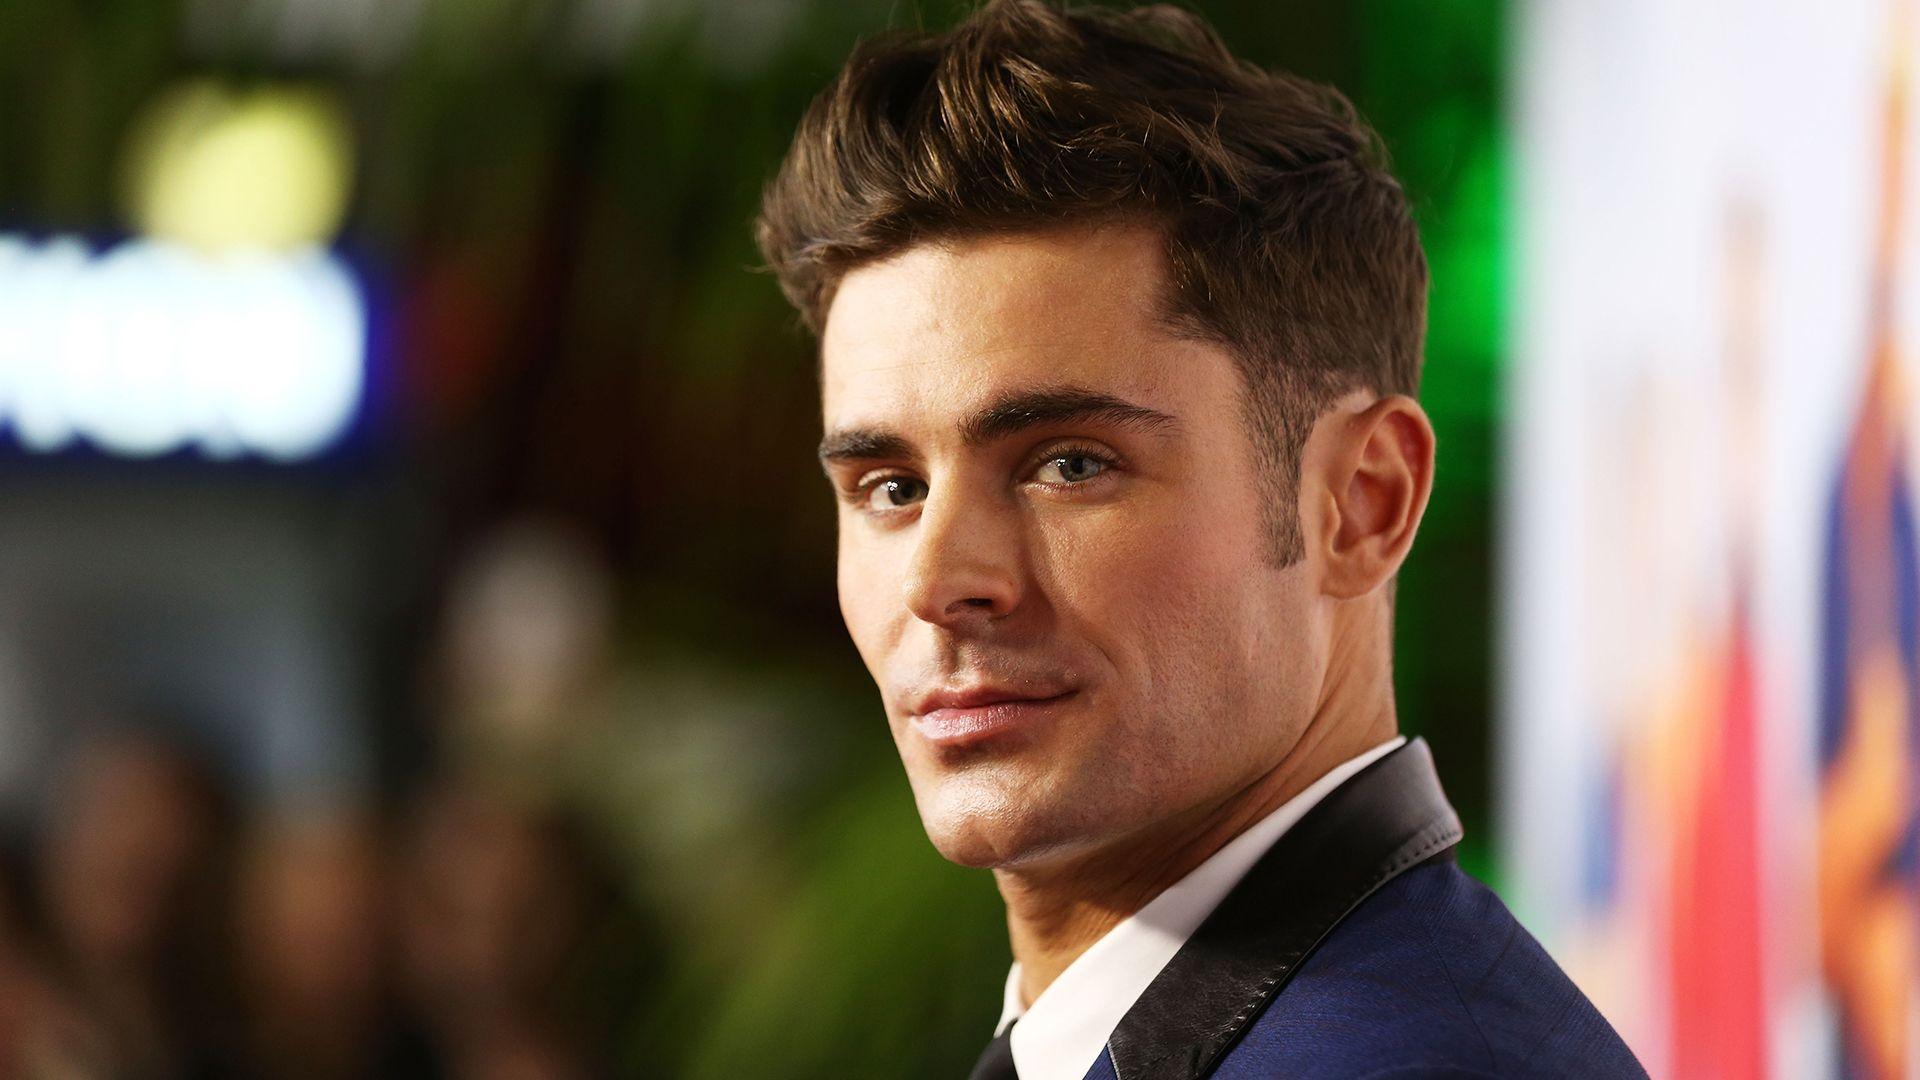 Zac Efron has a mustache at 'The Greatest Showman' premiere